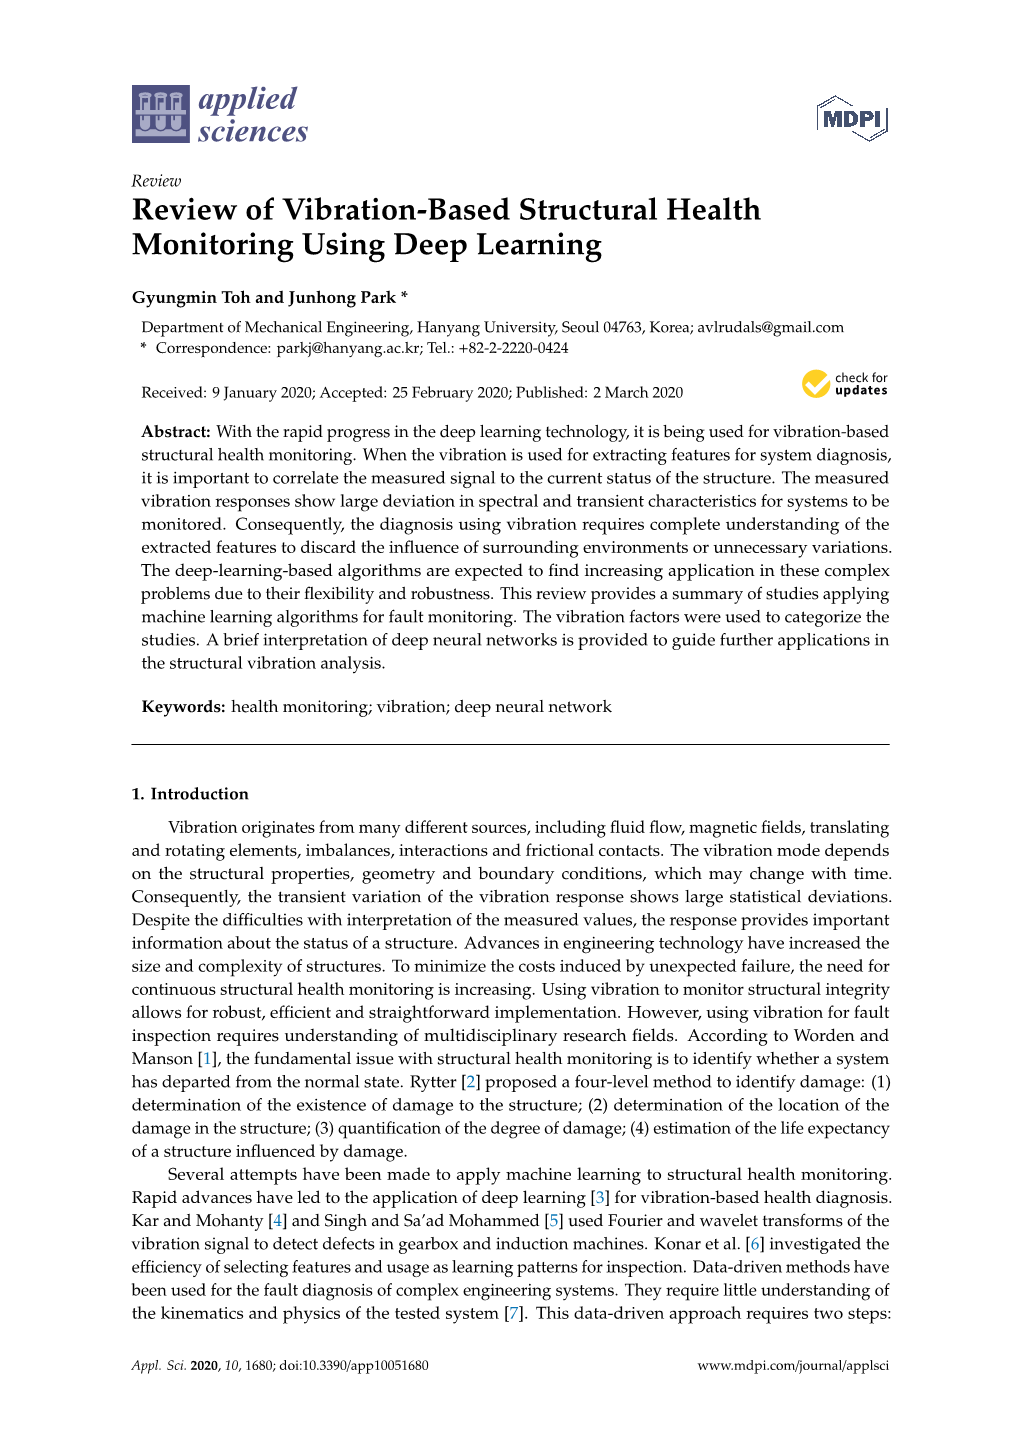 Review of Vibration-Based Structural Health Monitoring Using Deep Learning